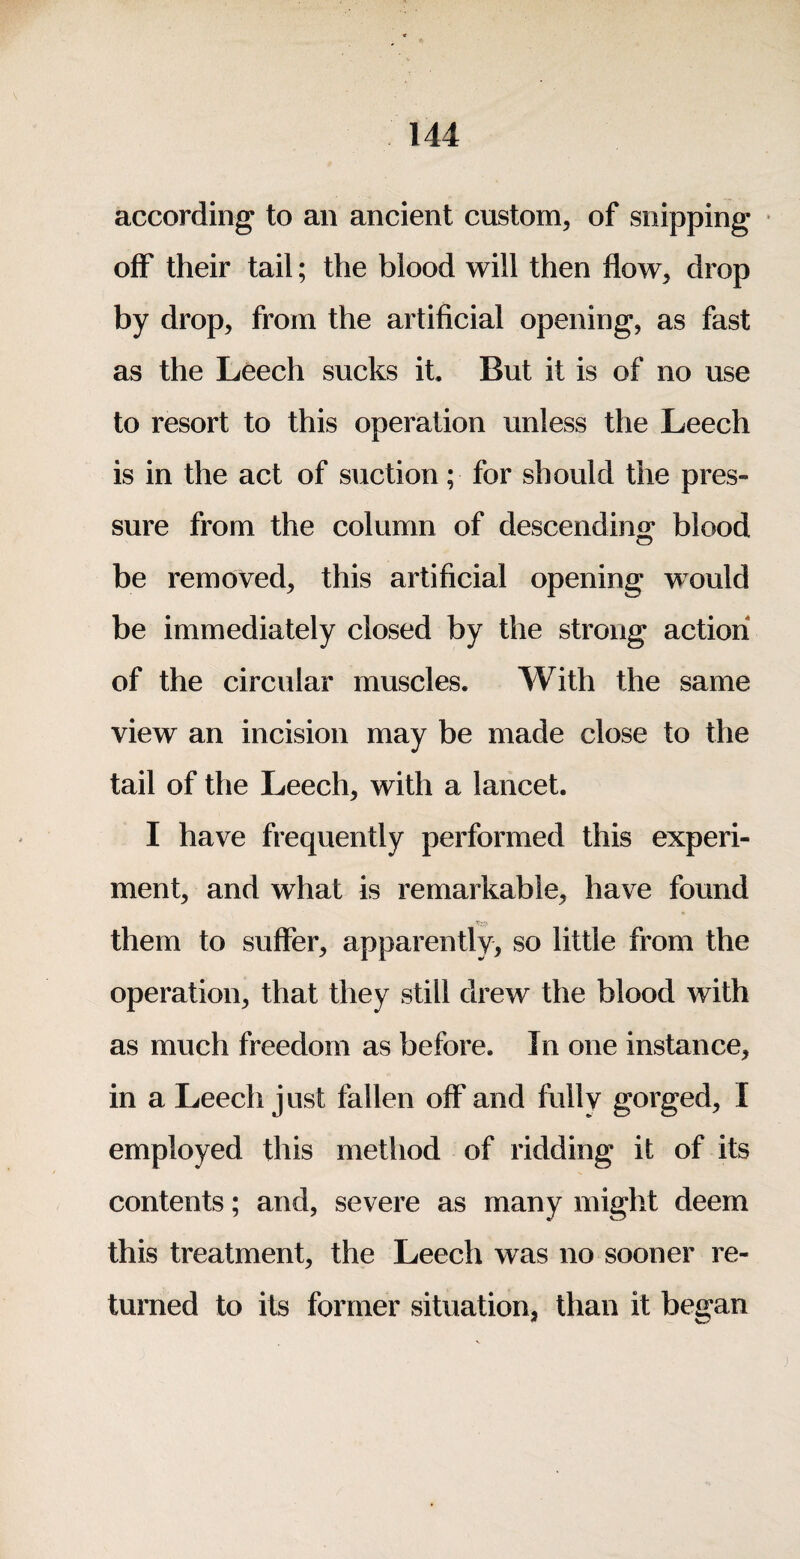 according to an ancient custom, of snipping ^ off their tail; the blood will then flow, drop by drop, from the artificial opening, as fast as the Leech sucks it. But it is of no use to resort to this operation unless the Leech is in the act of suction; for should the pres¬ sure from the column of descendmo* blood be removed, this artificial opening would be immediately closed by the strong action of the circular muscles. With the same view an incision may be made close to the tail of the Leech, with a lancet. I have frequently performed this experi¬ ment, and what is remarkable, have found them to suffer, apparently, so little from the operation, that they still drew the blood with as much freedom as before. In one instance, in a Leech just fallen off and fully gorged, I employed this method of ridding it of its contents; and, severe as many might deem this treatment, the Leech was no sooner re¬ turned to its former situation, than it began